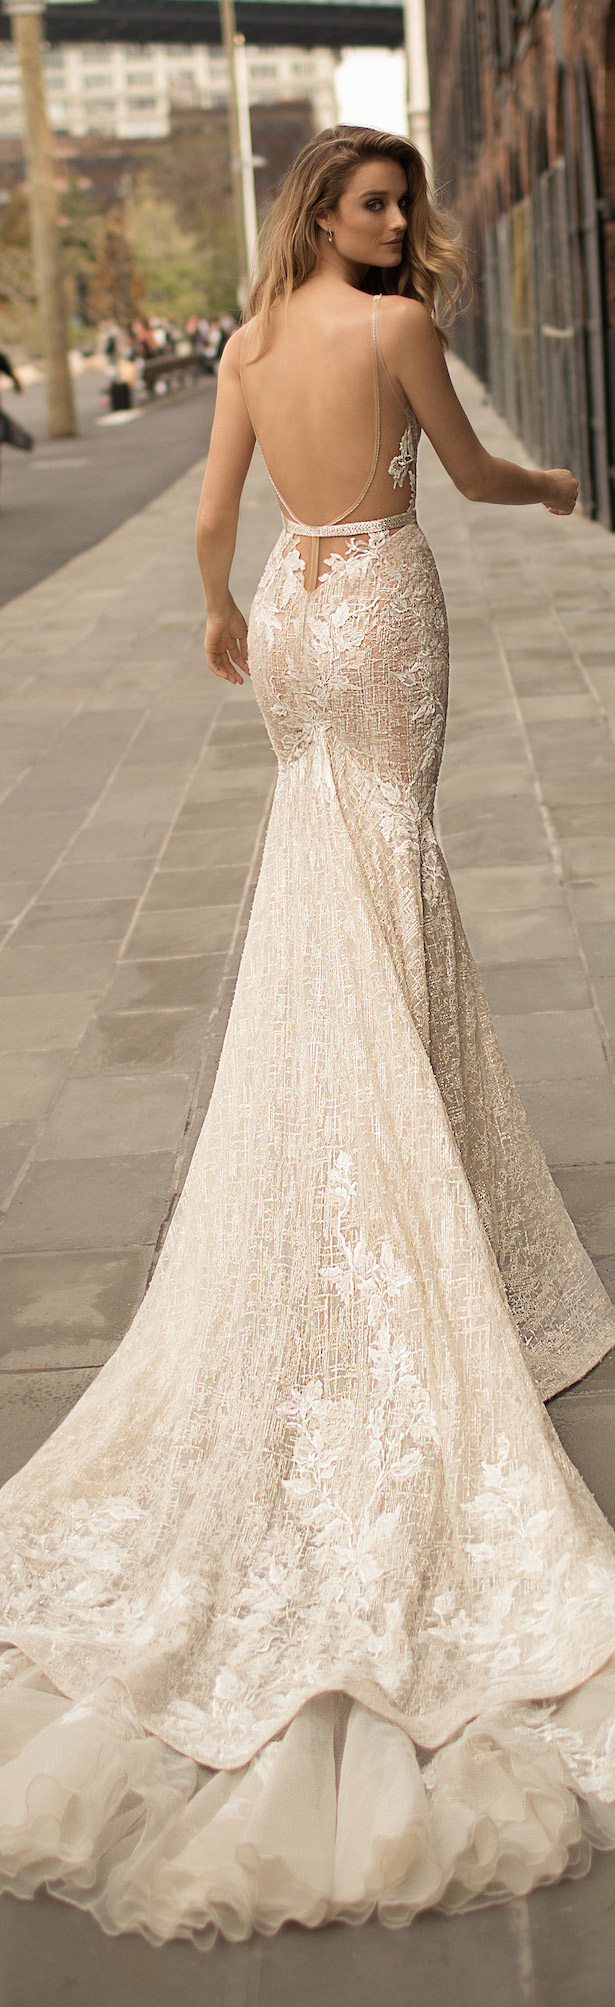 Berta Wedding Dress Collection Spring 2018 Belle The